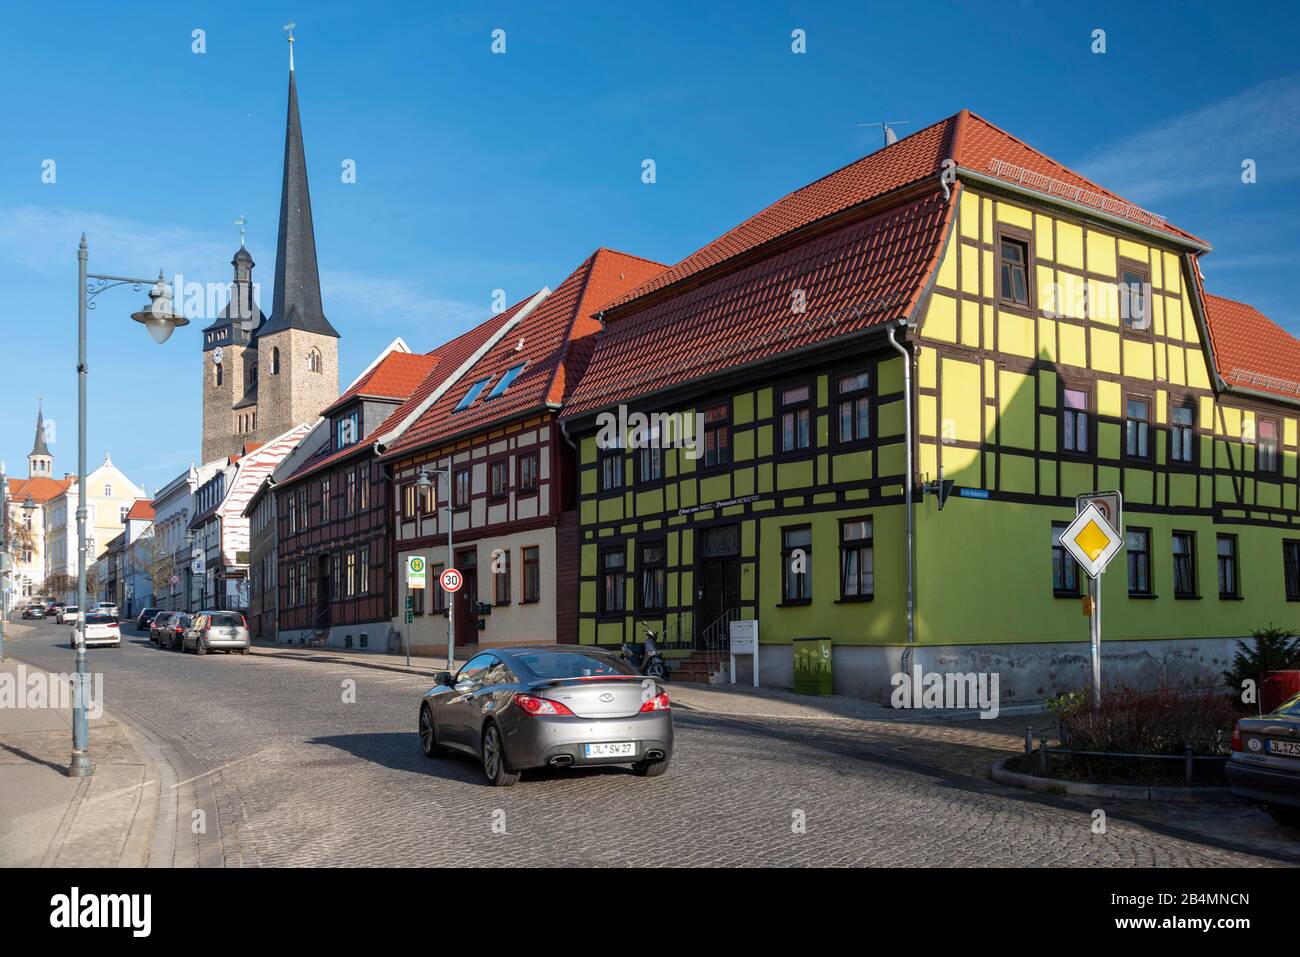 Germany, Saxony-Anhalt, castle, half-timbered houses, Church of Our Lady, birthplace of the military theorist Carl von Clausewitz and the writer Brigitte Reimann. Stock Photo